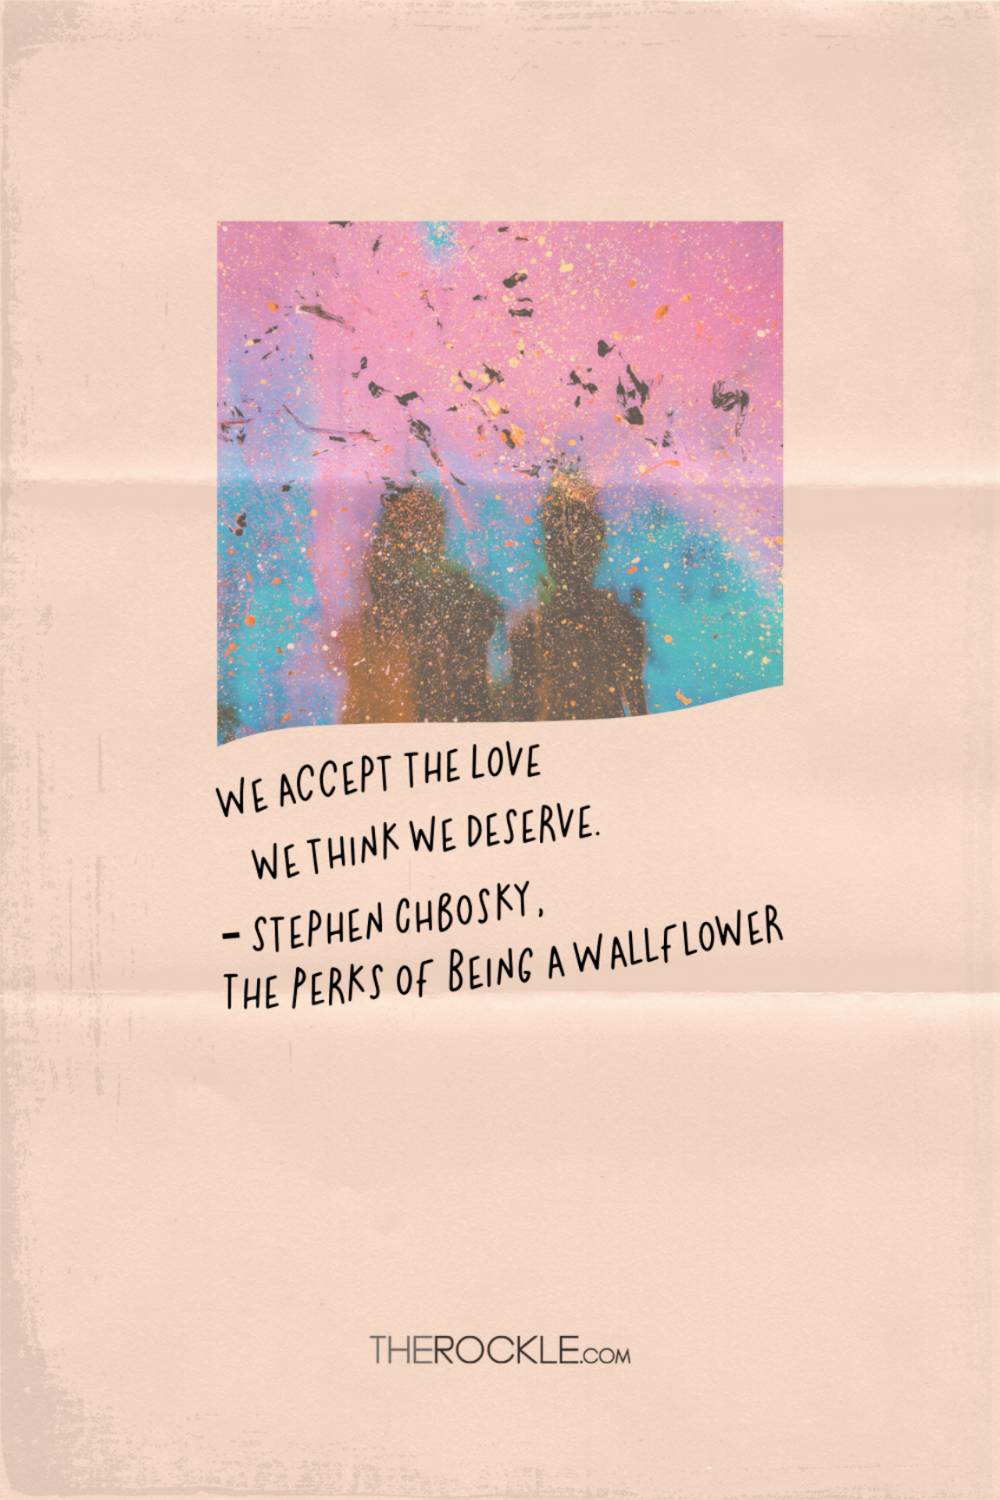 Quote from The Perks of Being a Wallflower